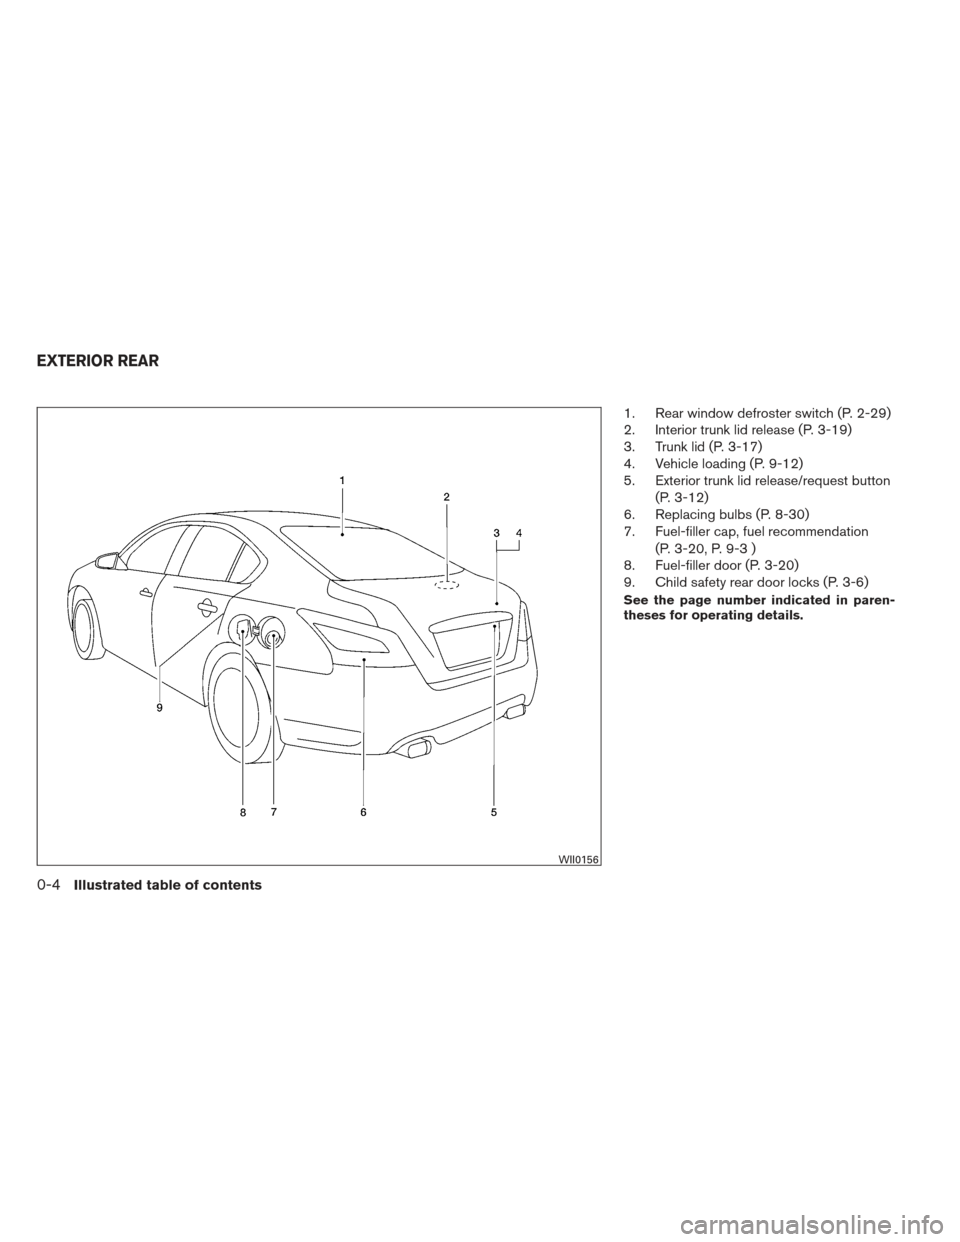 NISSAN MAXIMA 2013 A35 / 7.G User Guide 1. Rear window defroster switch (P. 2-29)
2. Interior trunk lid release (P. 3-19)
3. Trunk lid (P. 3-17)
4. Vehicle loading (P. 9-12)
5. Exterior trunk lid release/request button(P. 3-12)
6. Replacing